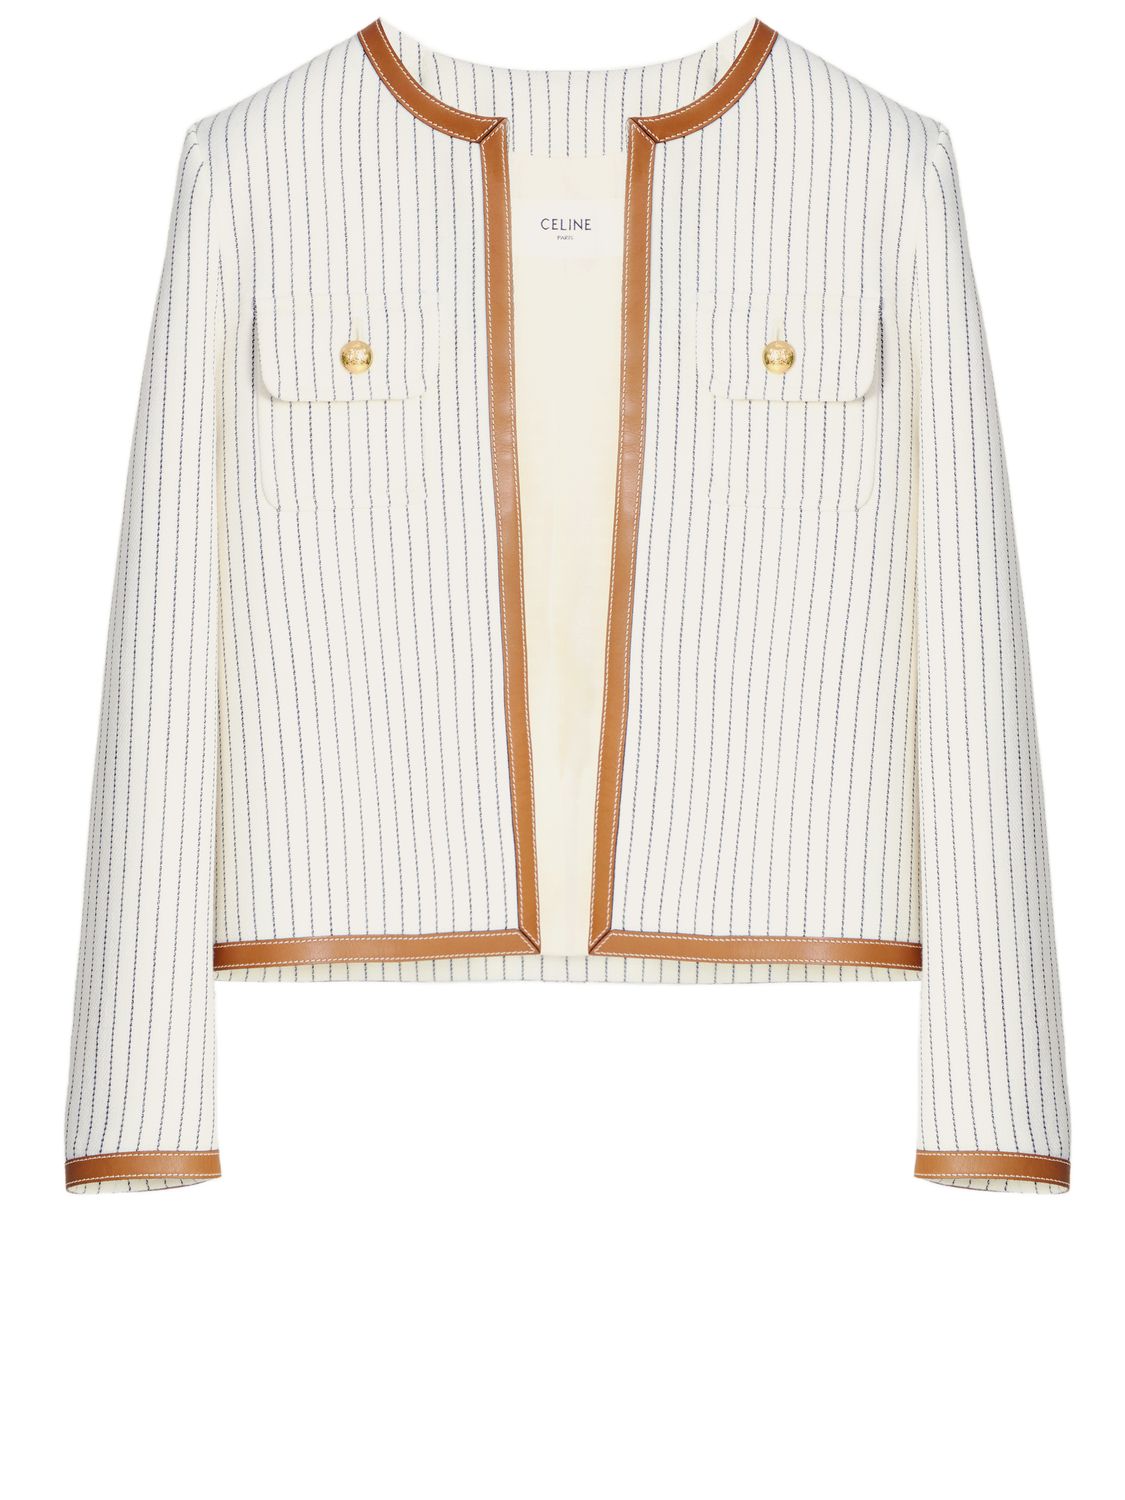 CELINE Striped Wool and Cotton Blend Chelsea Jacket in Cream and Black for Women